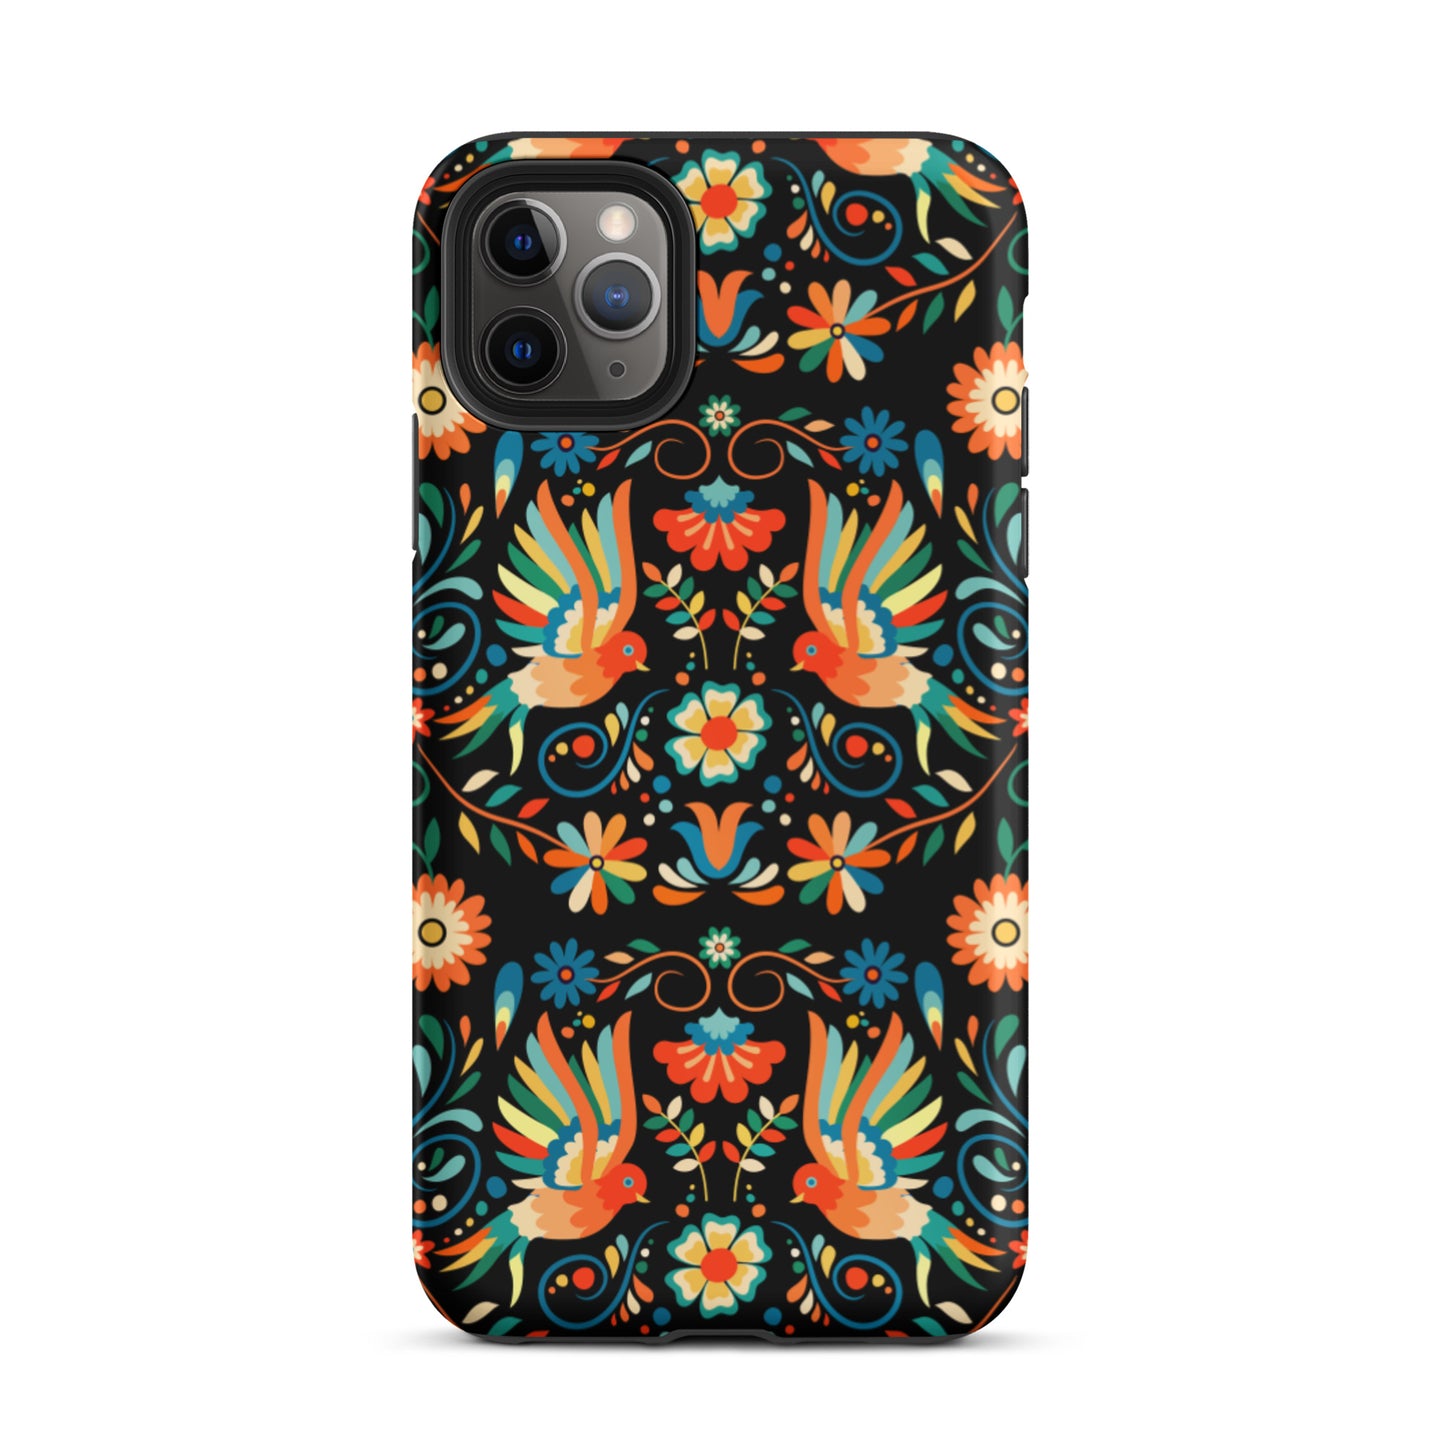 Mexican Otomi Print Tough iPhone 11 Pro Max case